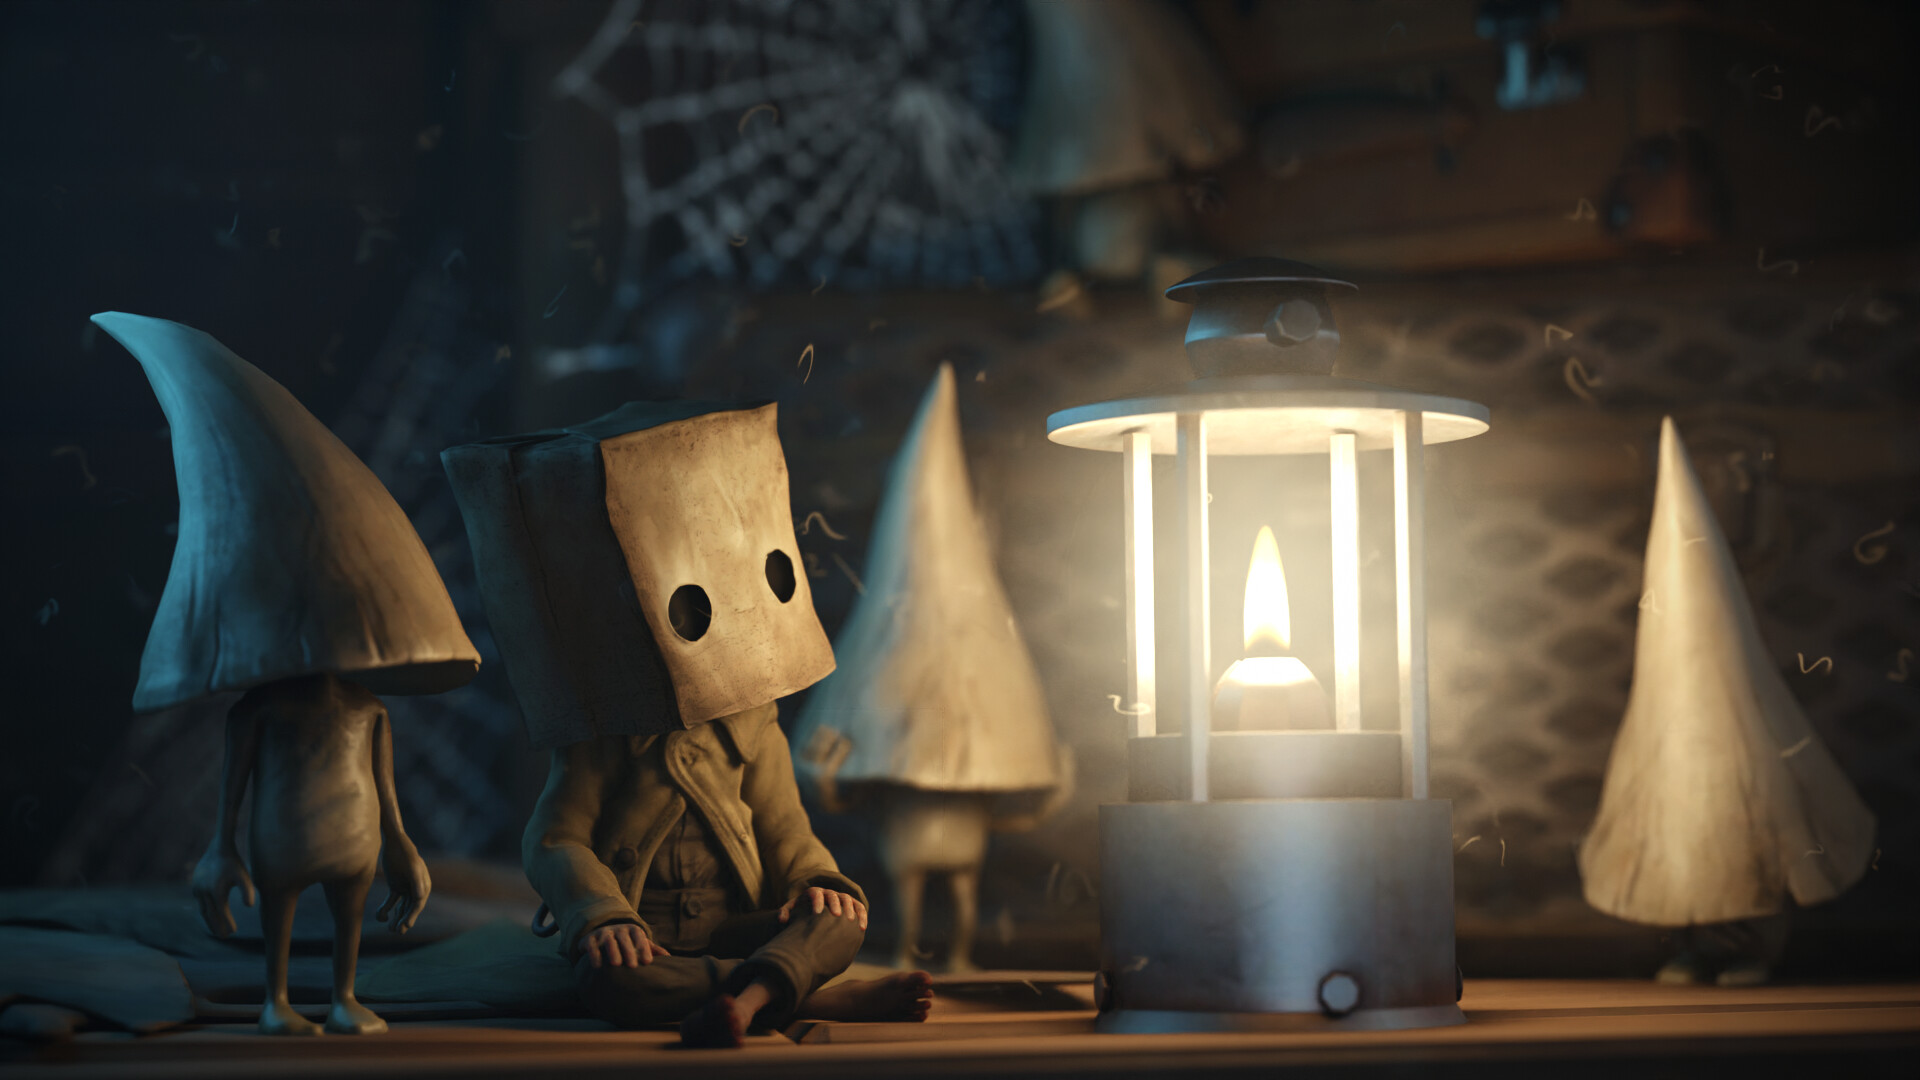 Little Nightmares II The Nome's Attic